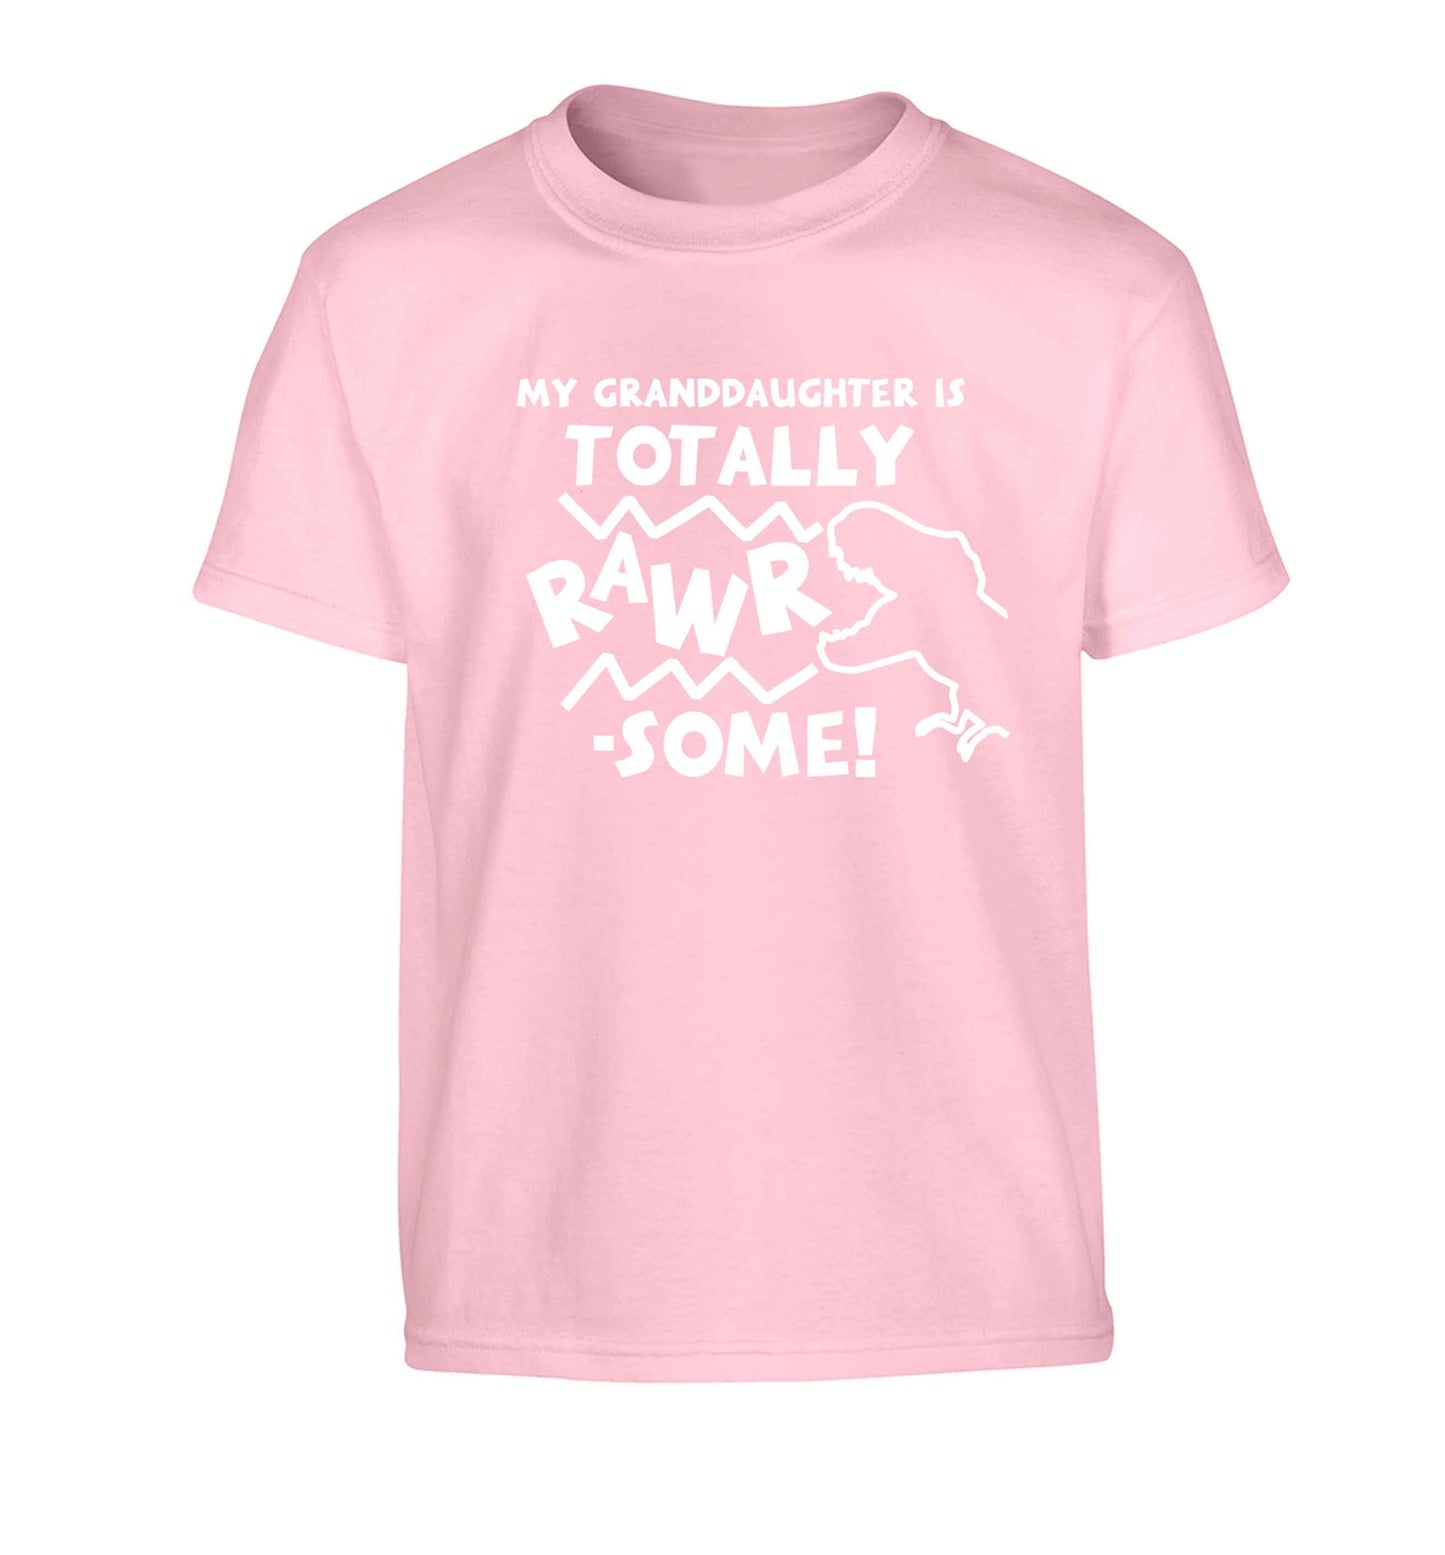 My granddaughter is totally rawrsome Children's light pink Tshirt 12-13 Years